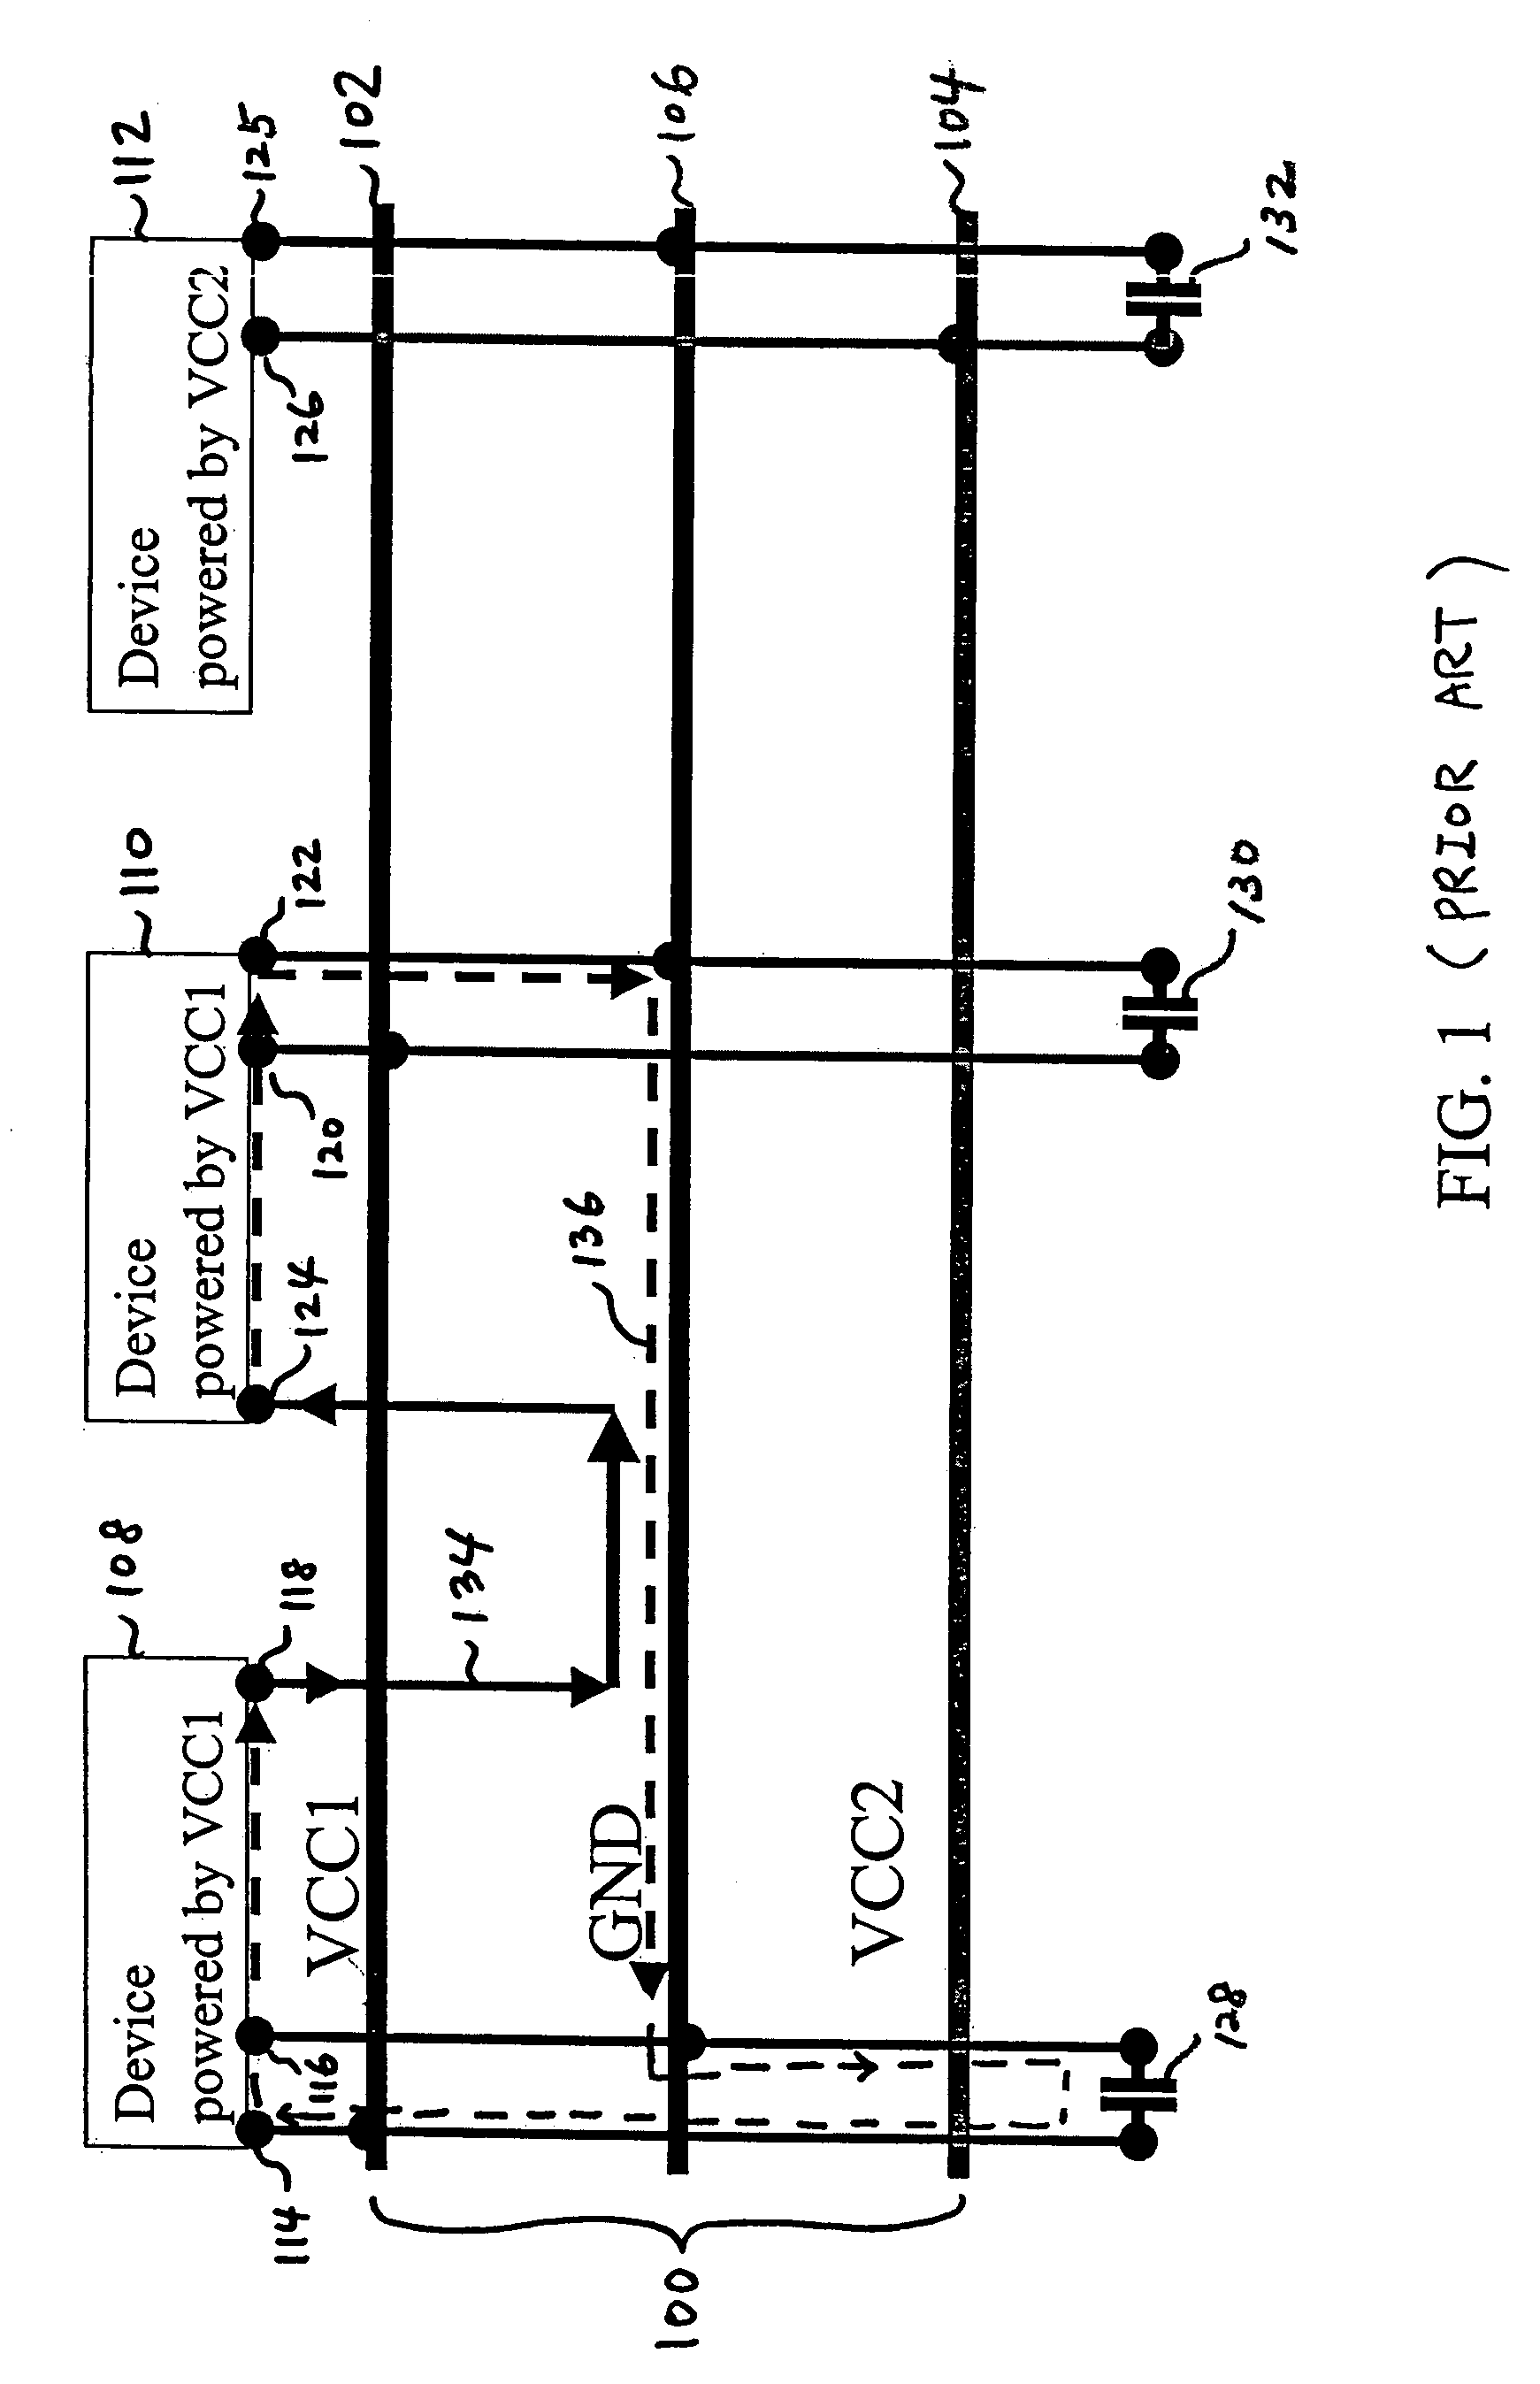 Method for selecting and placing bypass capacitors on multi-layer printed circuit boards